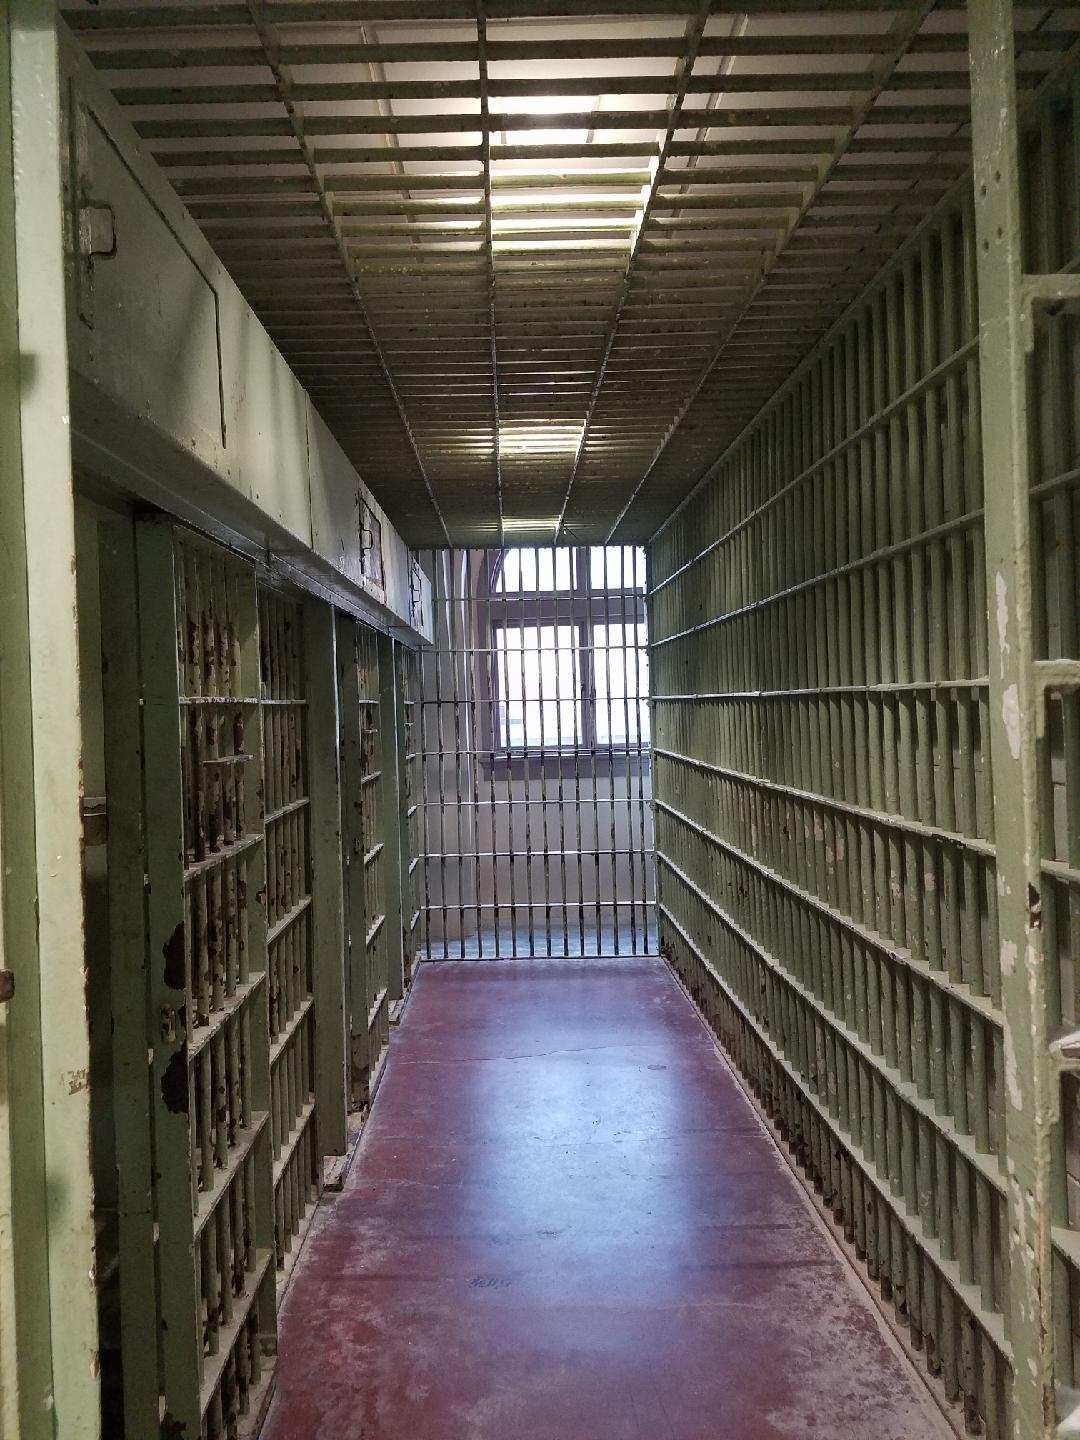 For these parts, this is a very famous jail cell in the Dallas area